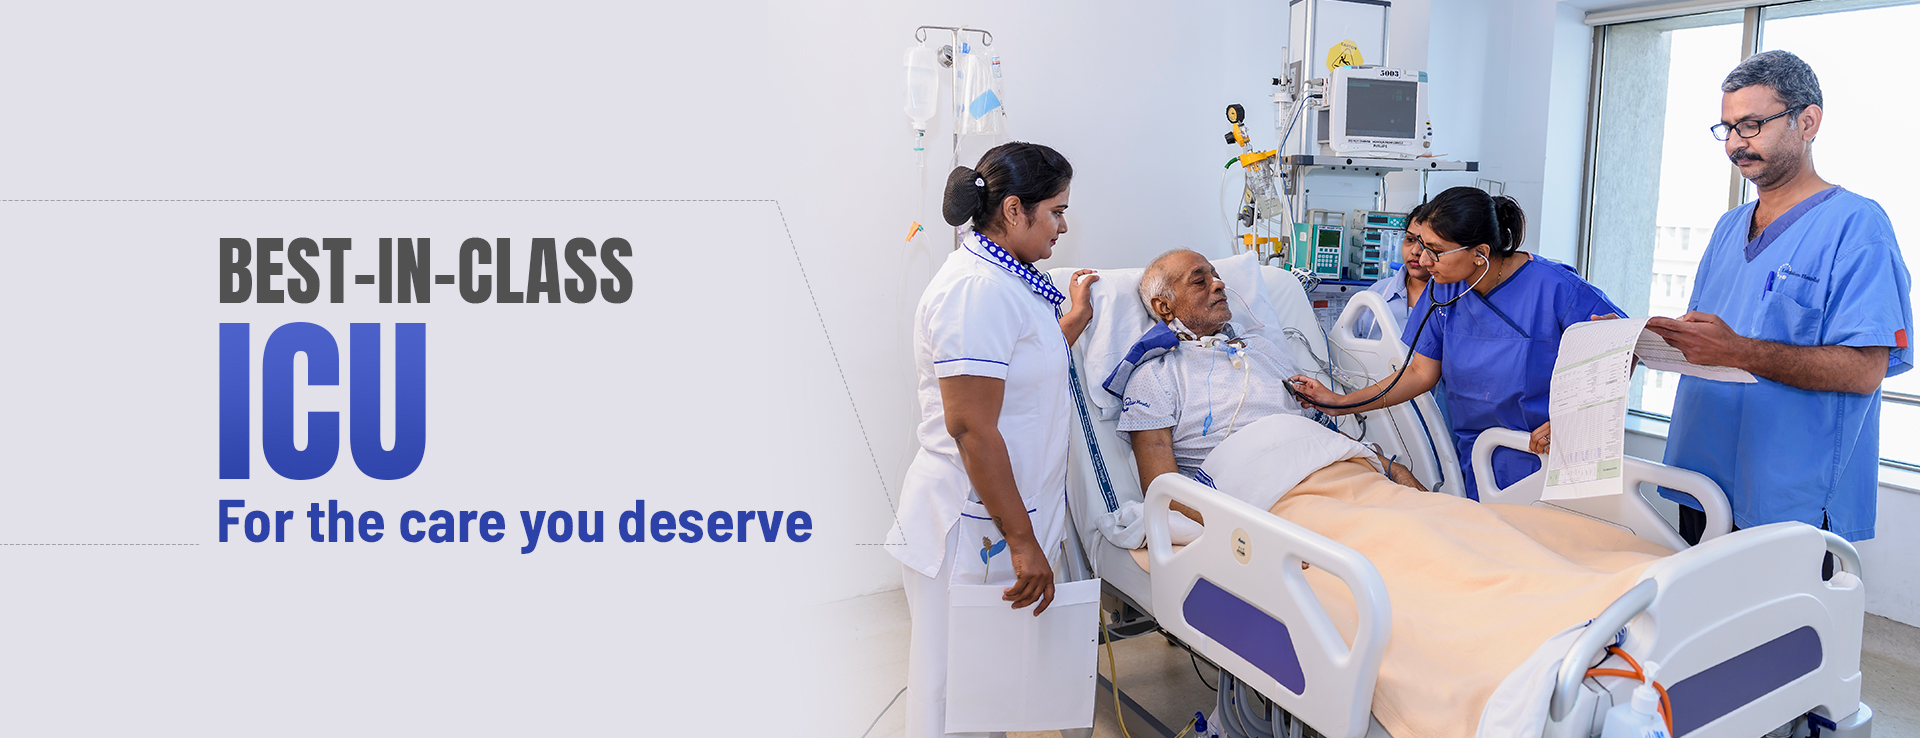 BEST-IN-CLASS ICU For the care you deserve